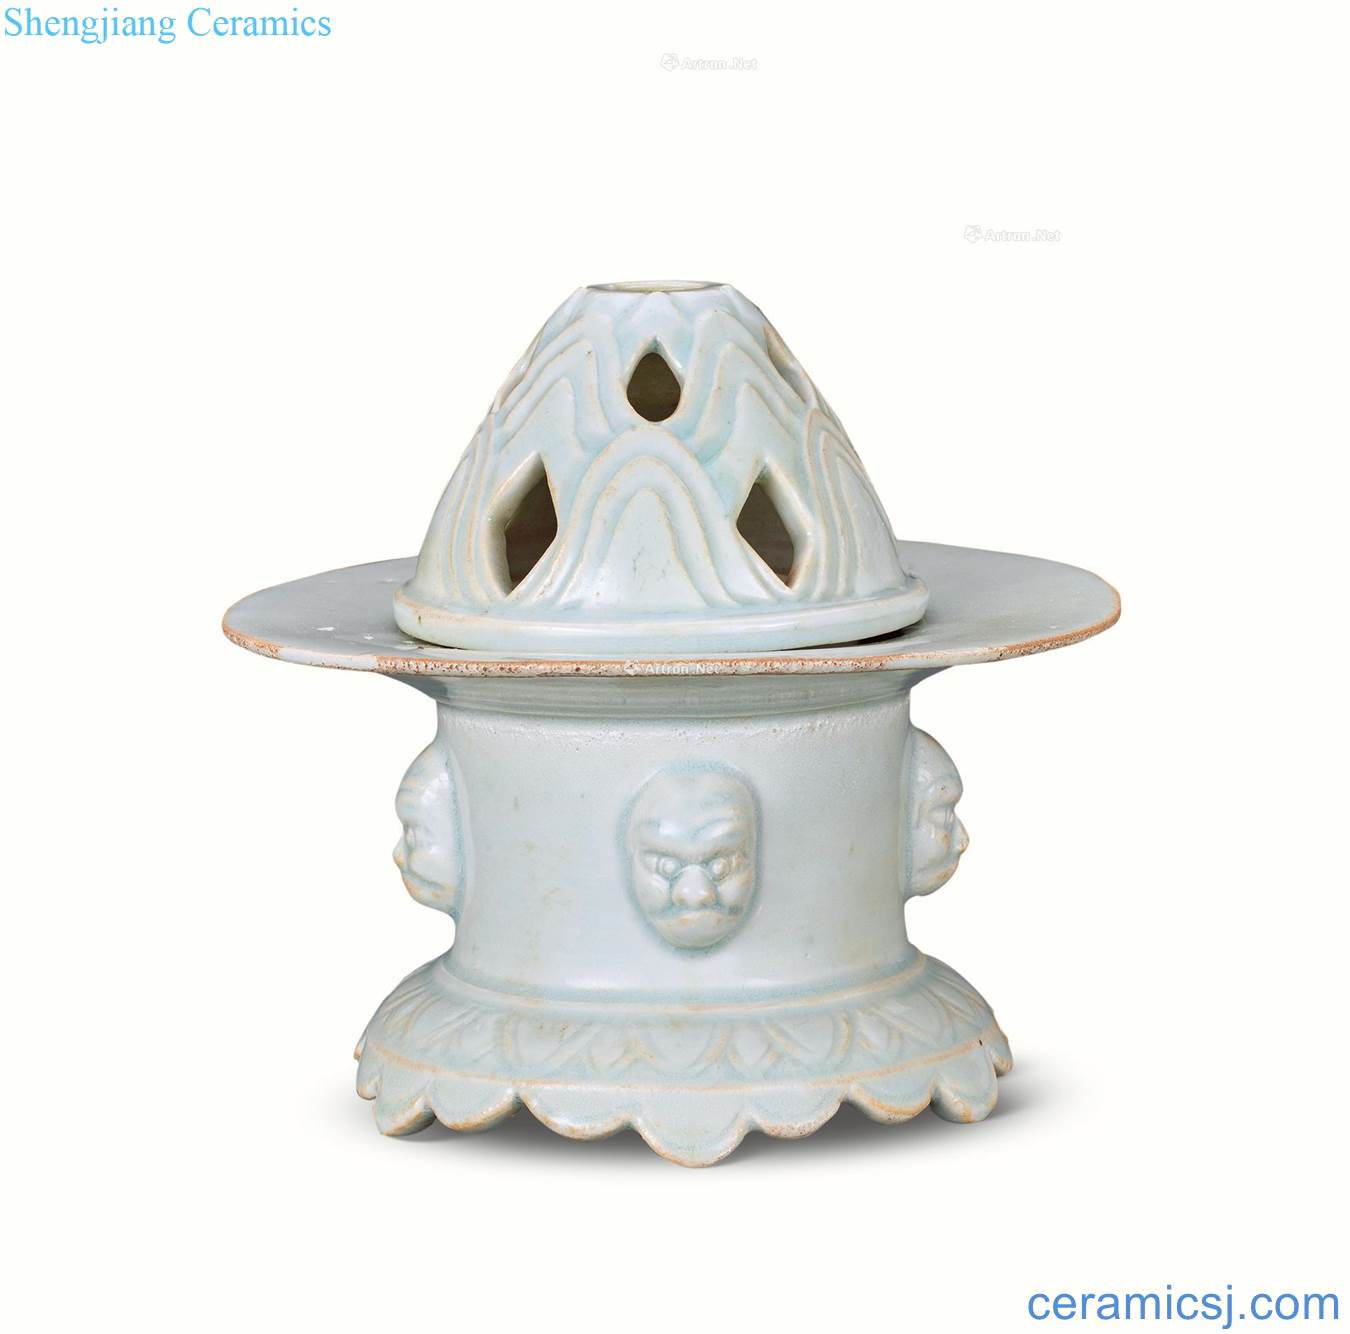 The song dynasty blue glaze lamps